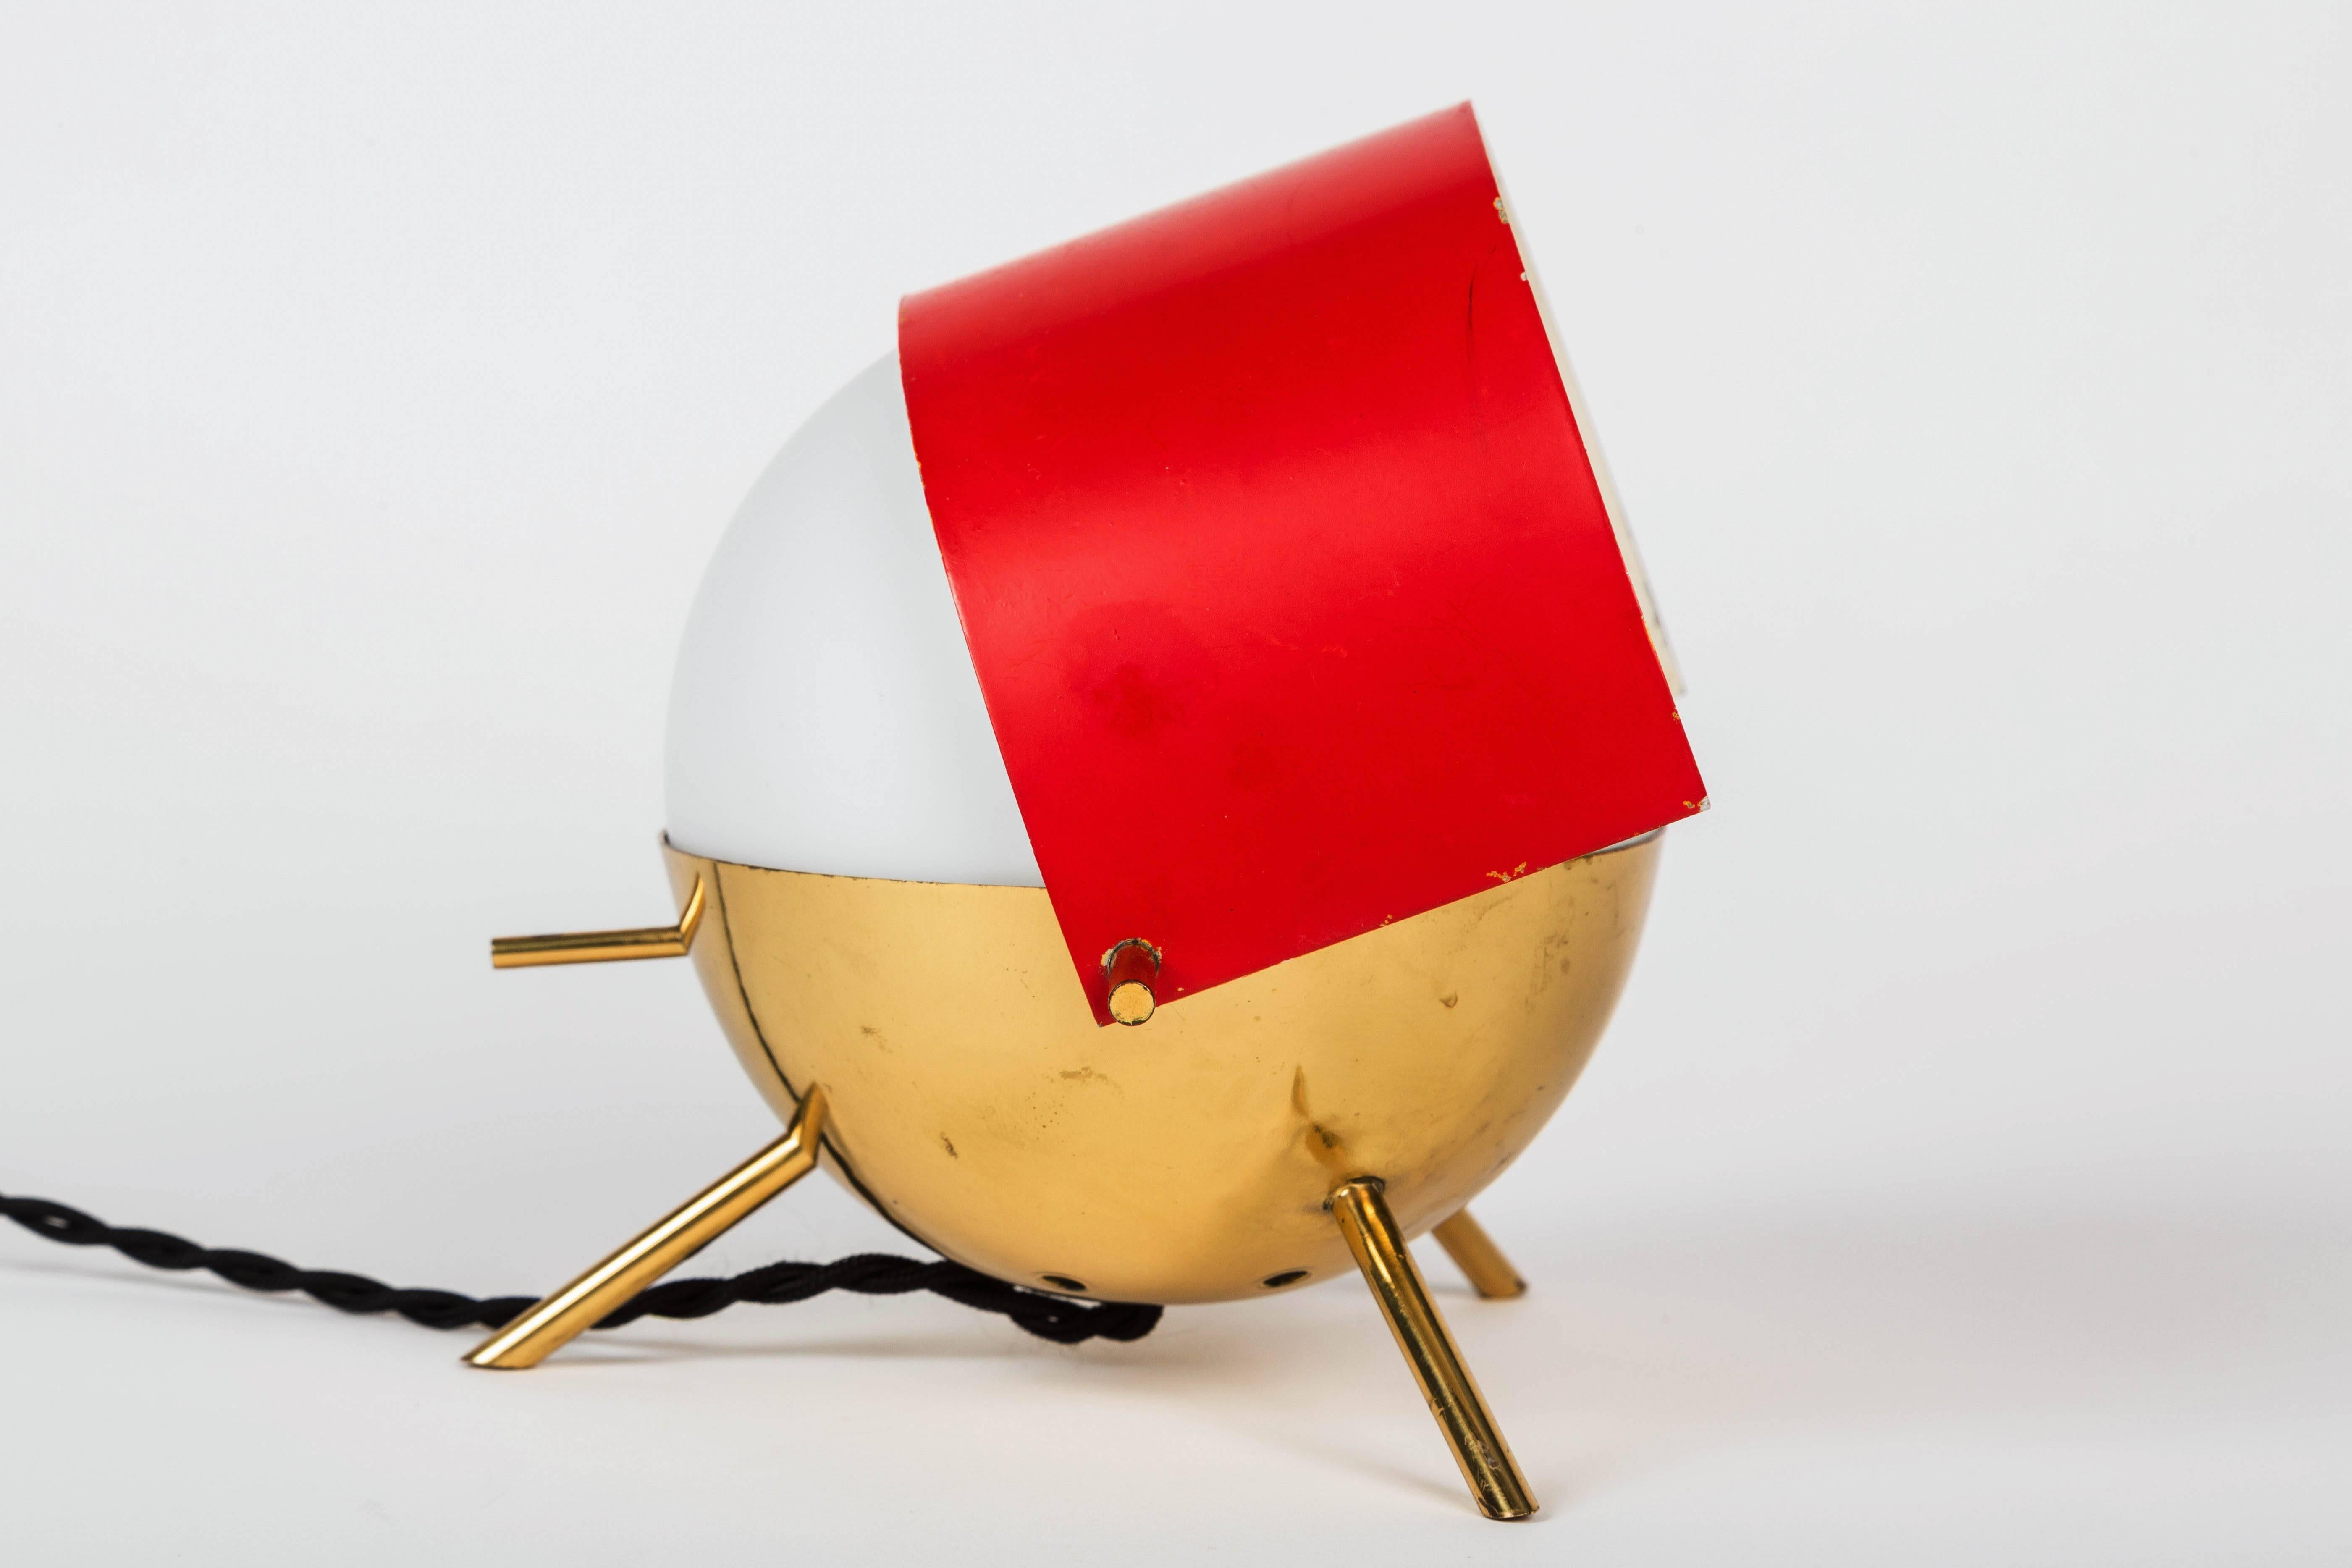 1950s Stilux Milano Tripod 'Visor' table lamp. This whimsical and sculptural lamp is executed in opaline glass, lightly patinated brass and painted metal adjustable visor with original red color in very good vintage condition.

Stilux was one of